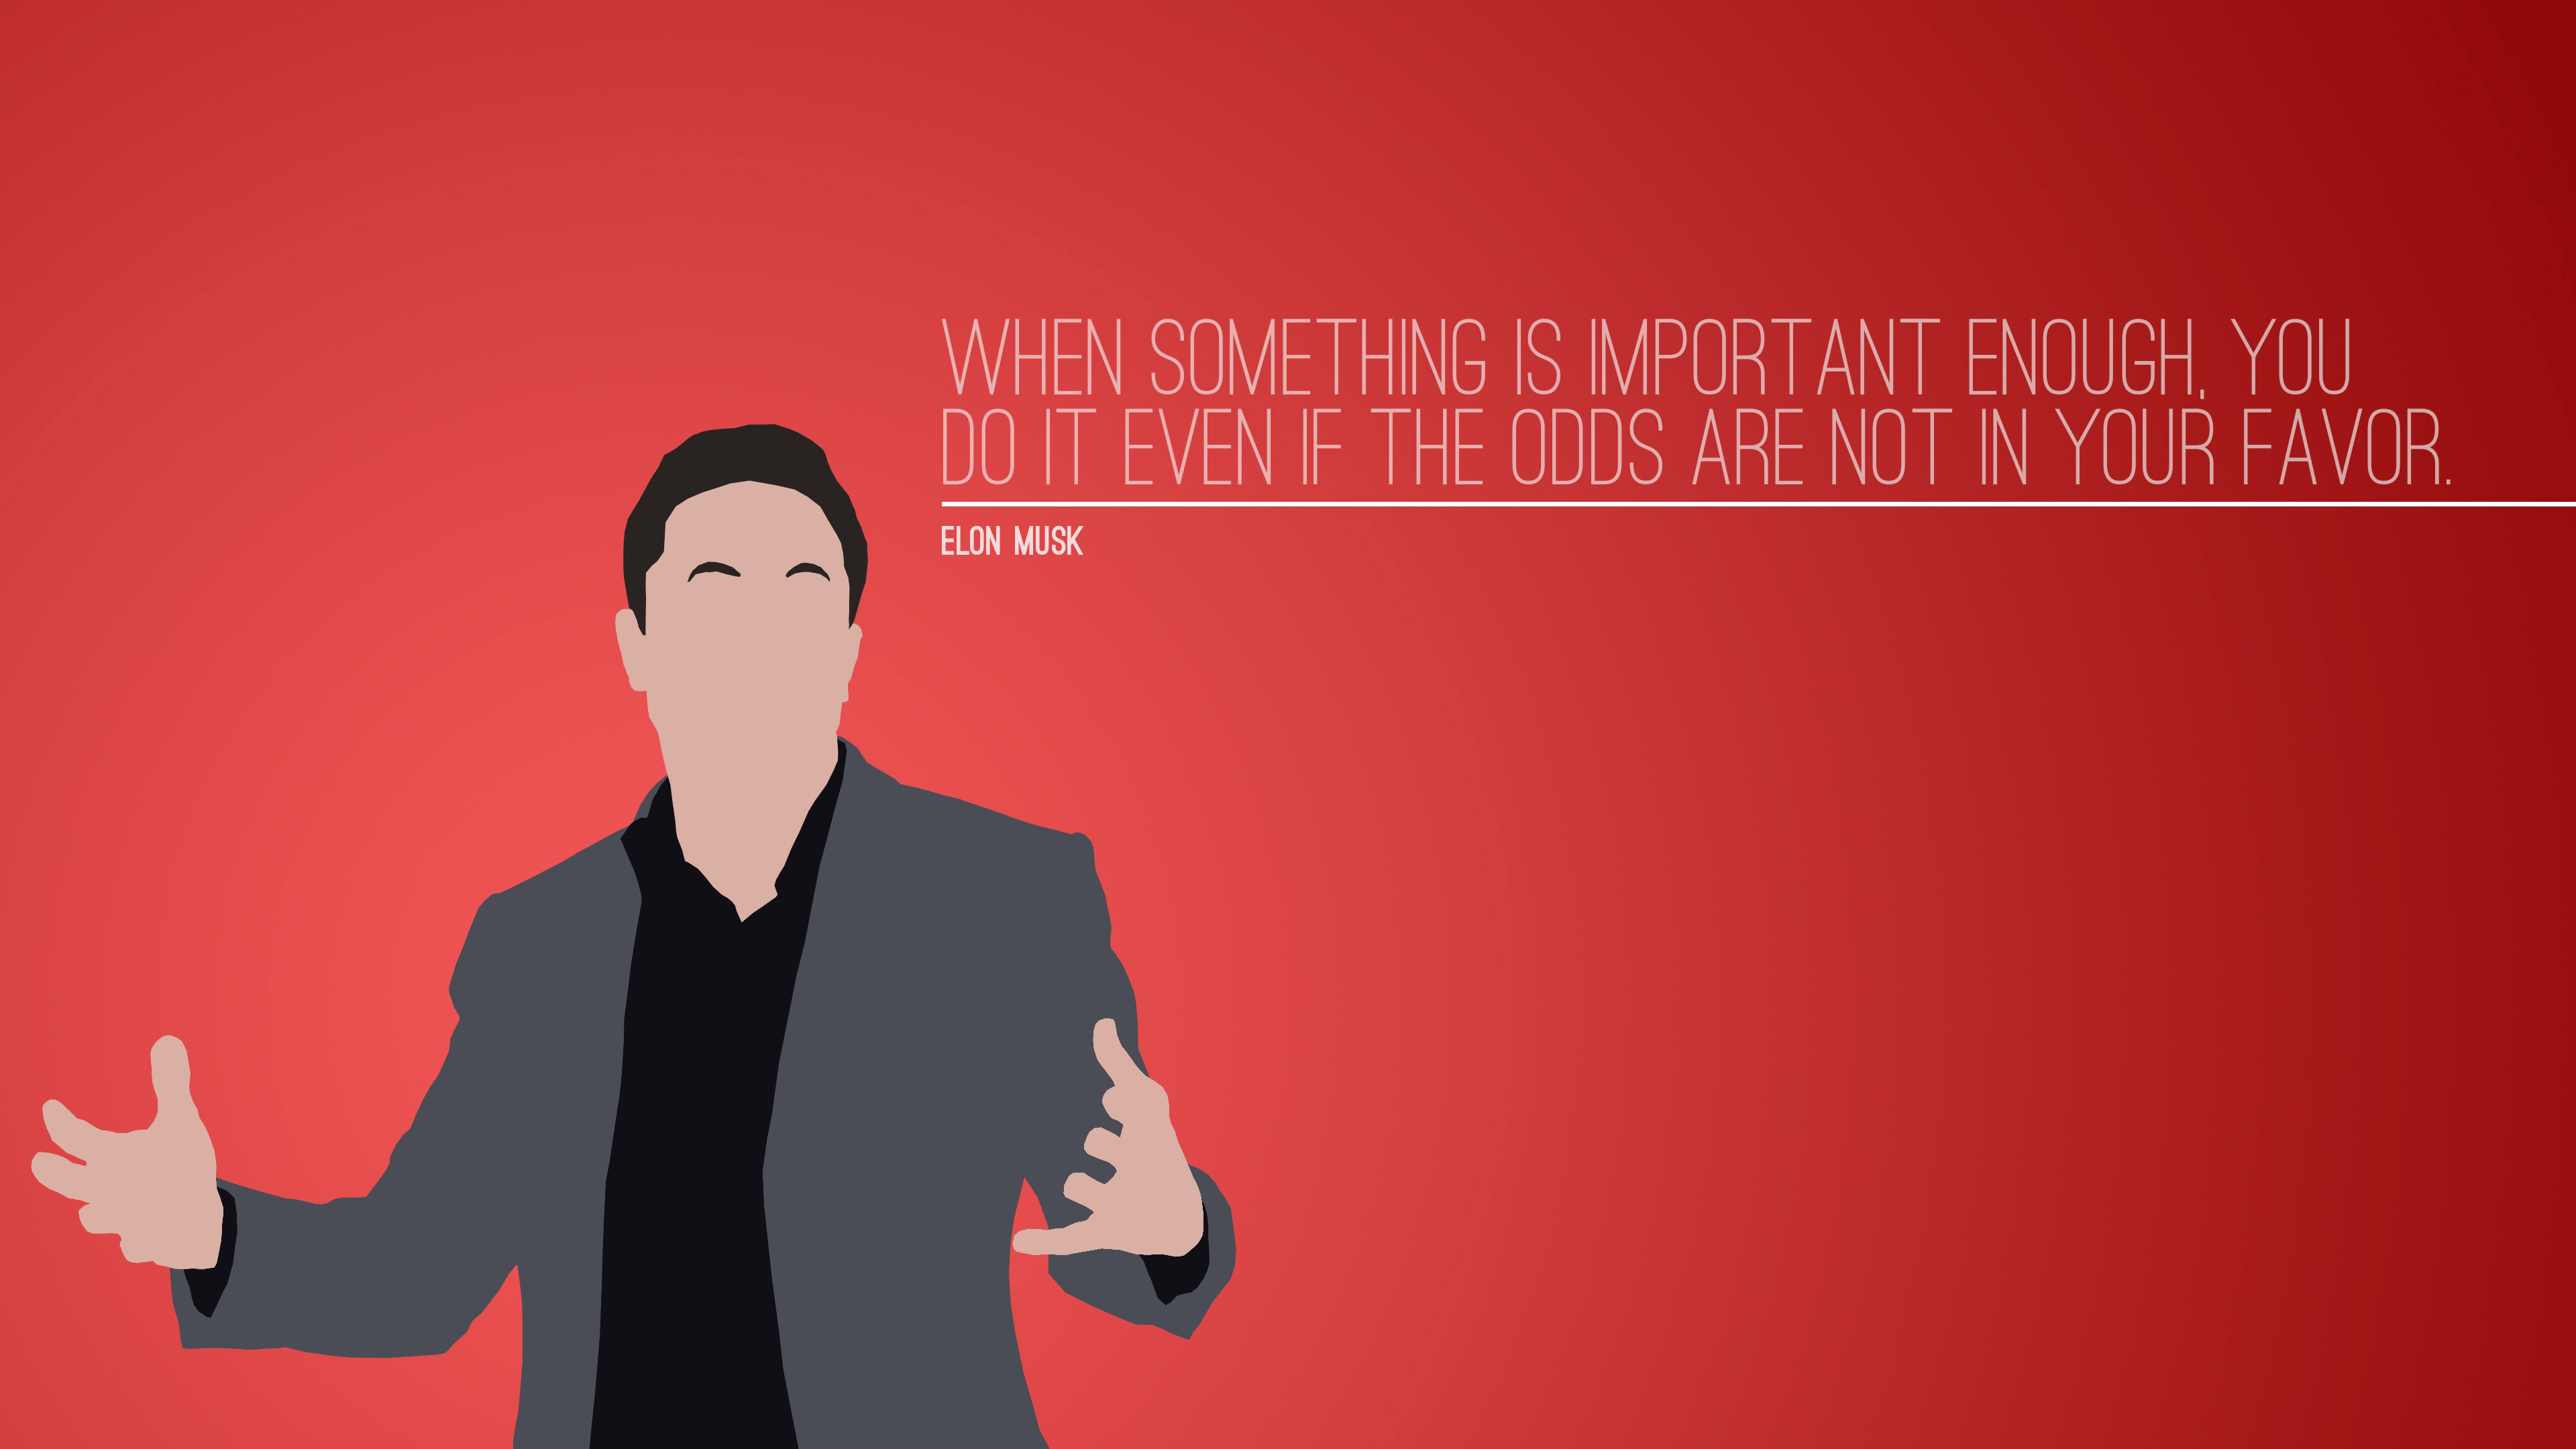 Elon Musk Quotes Wallpapers - Top Free Elon Musk Quotes Backgrounds